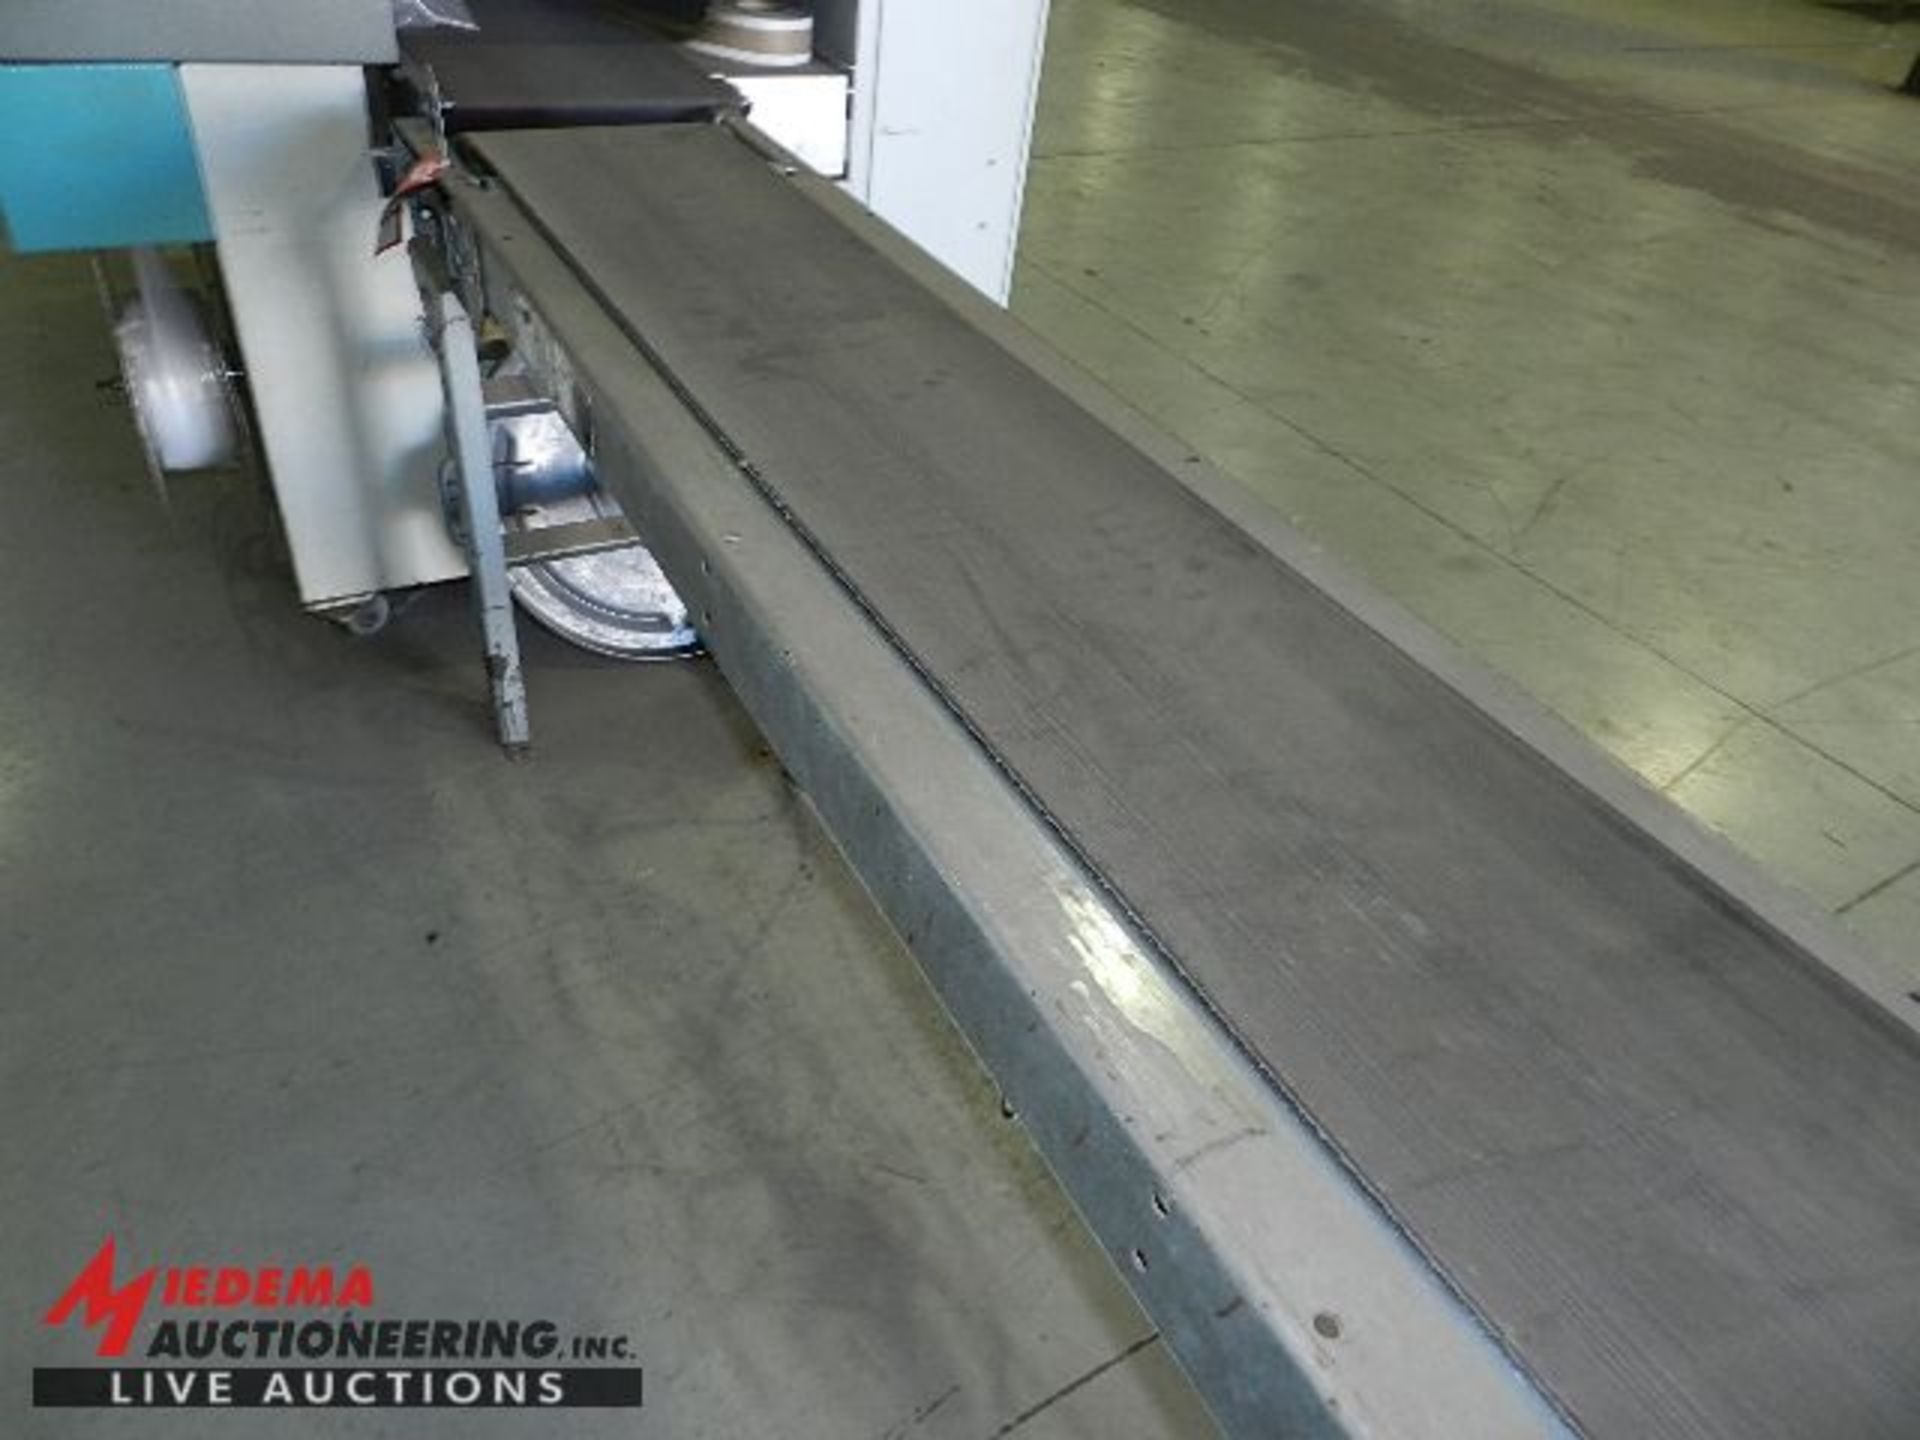 POWERED CONVEYOR TABLE WITH 12" RUBBER BELT, APPROX 12' LONG - Image 3 of 3